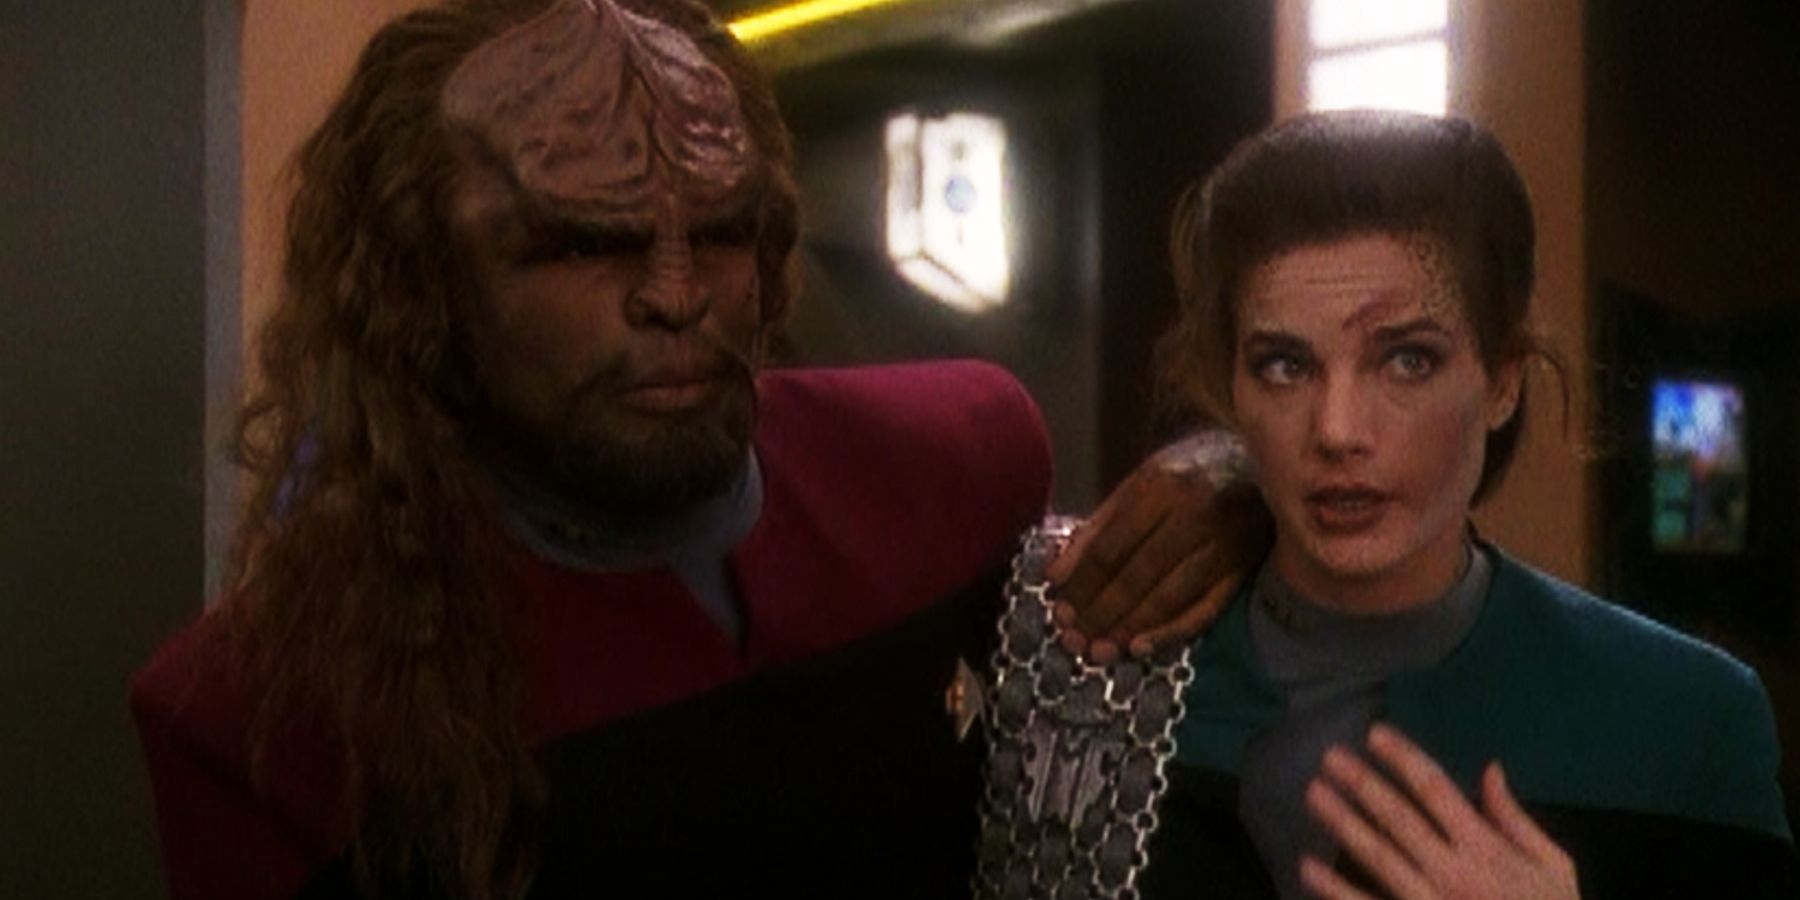 Worf and Dax find love in DS9 season 5, episode 3